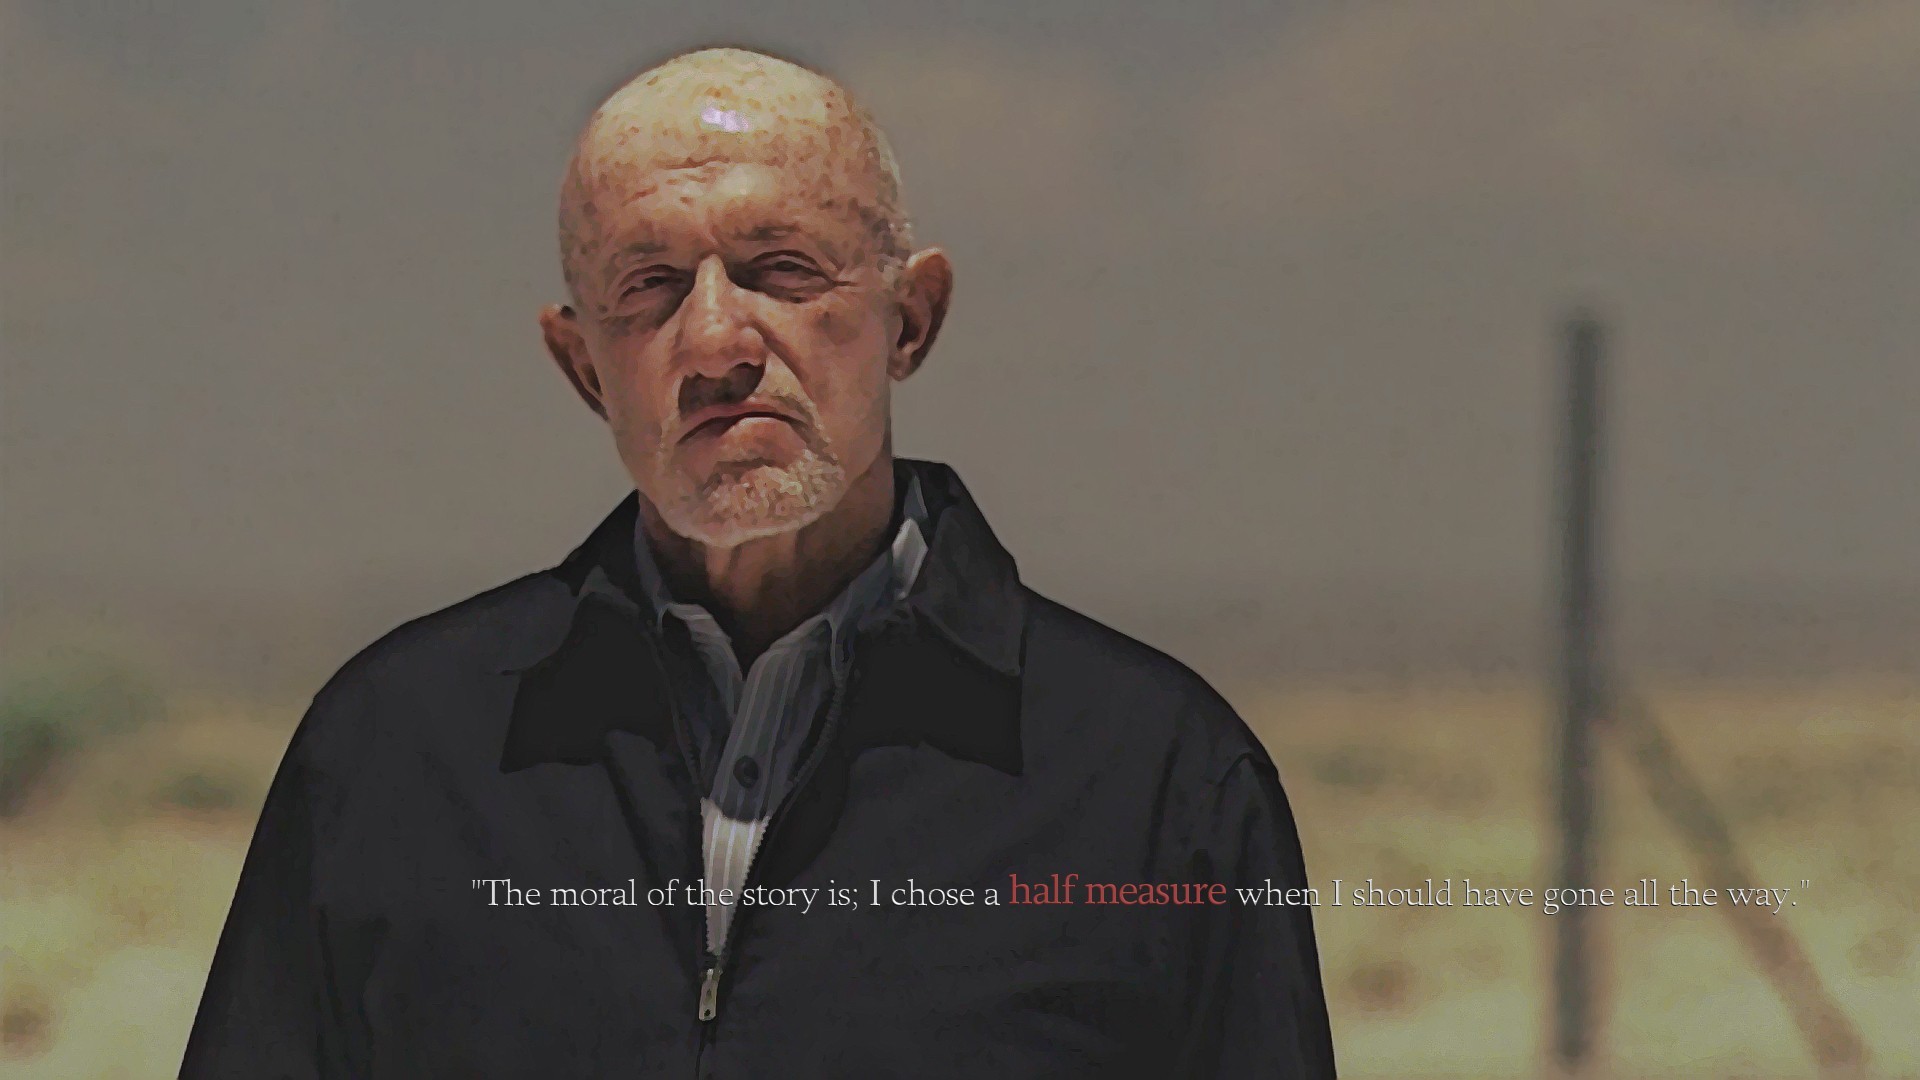 Breaking Bad Mike Ehrmantraut Quote 1920x1080